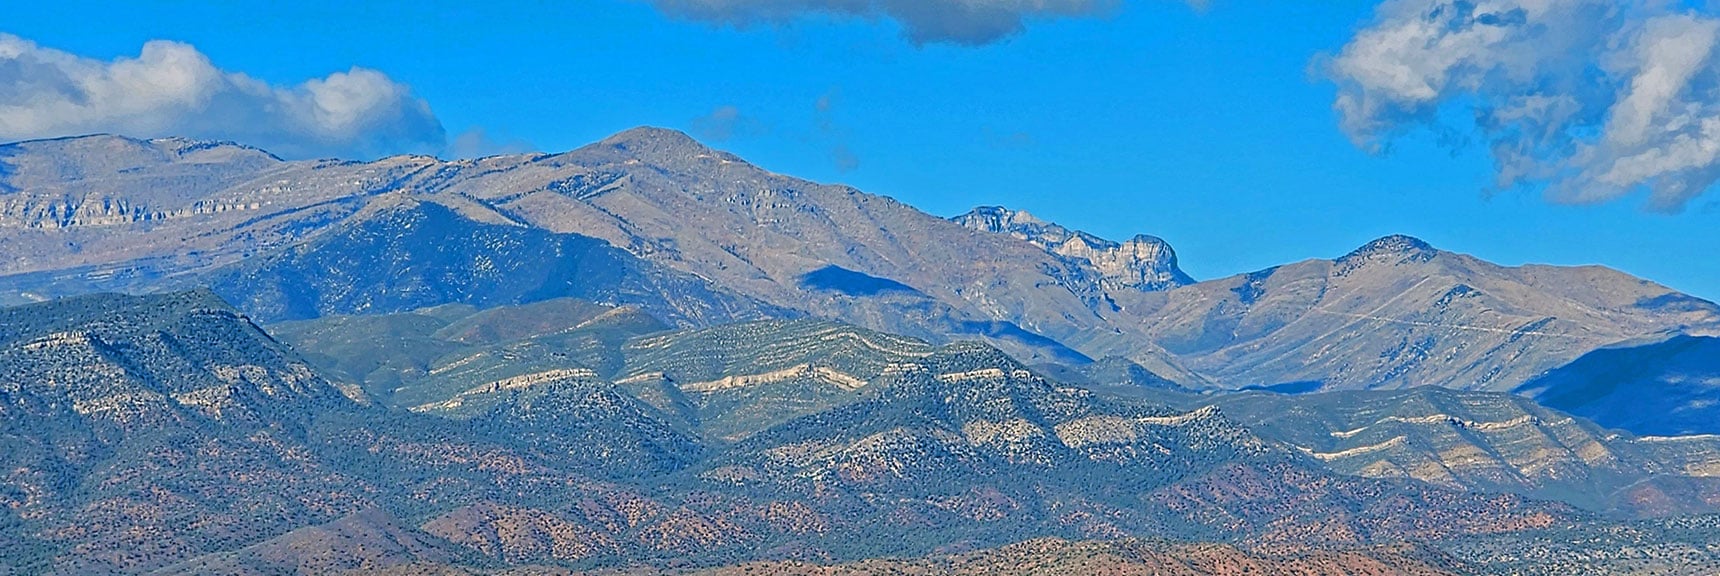 Larger View of Upper Lovell Canyon. Griffith Peak (left); Mummy Mt. (middle) Harris Mt. (right) | Landmark Bluff Summit | Lovell Canyon, Nevada